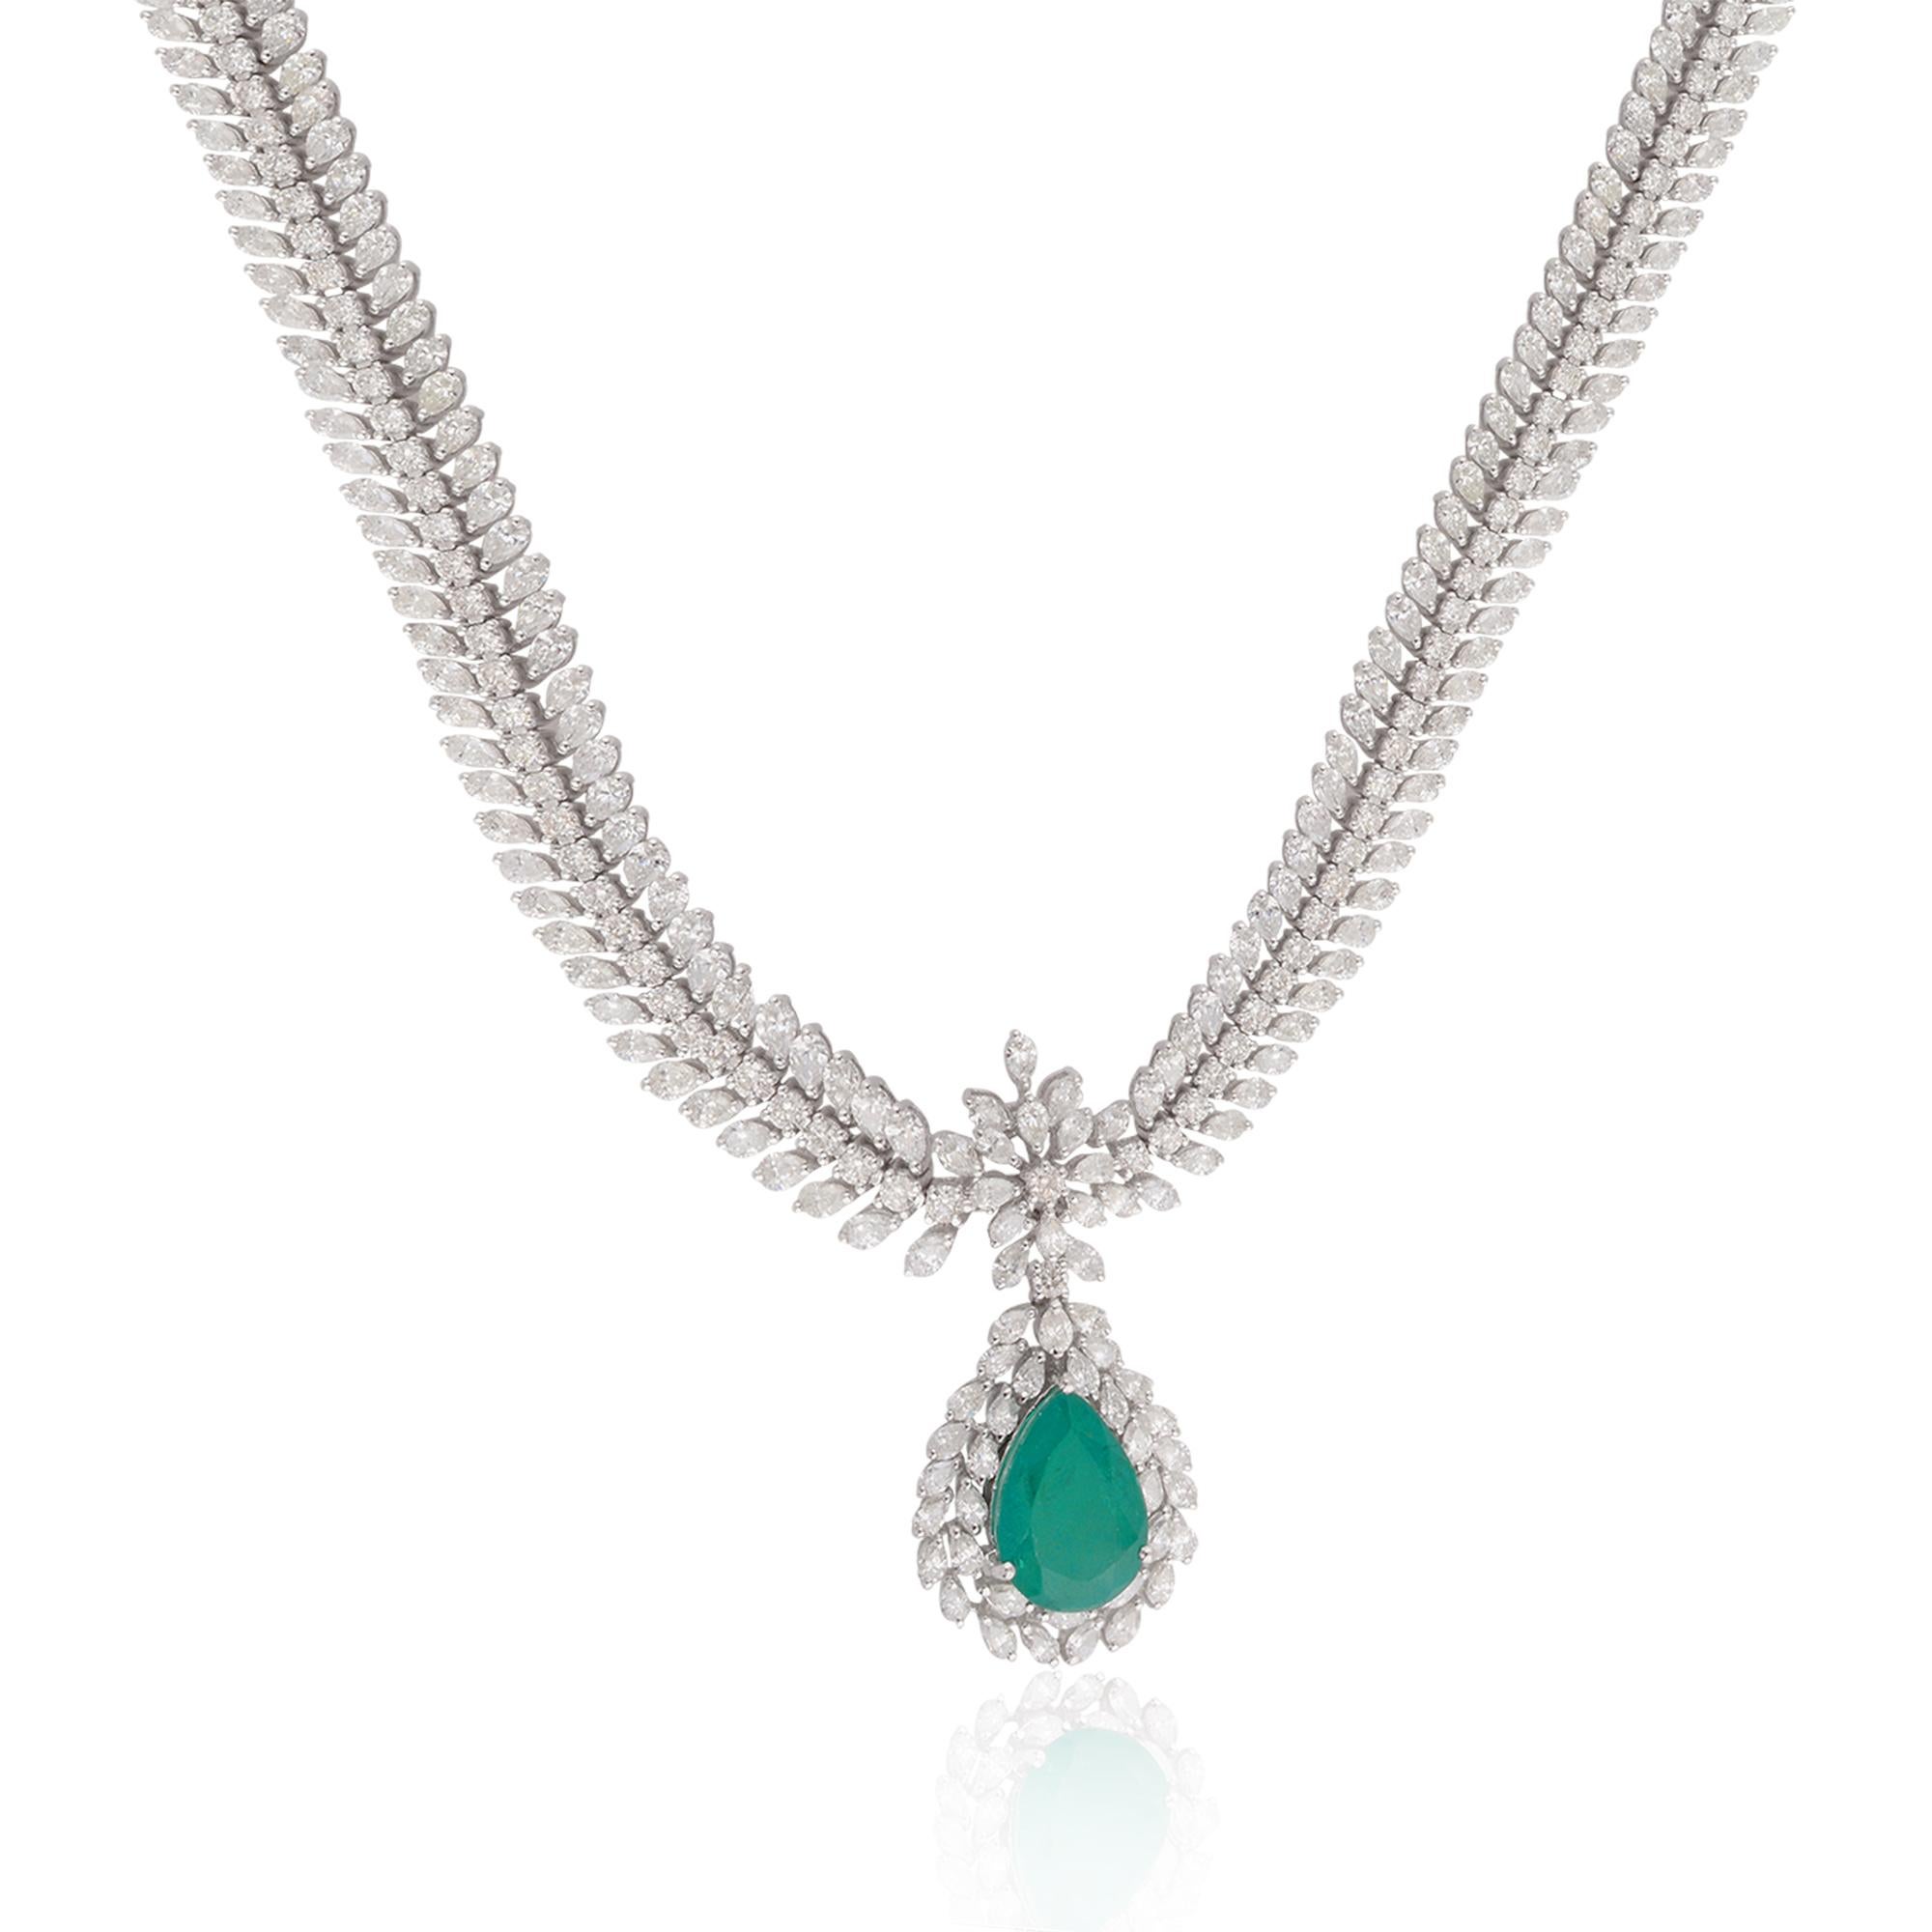 The focal point of this necklace is the mesmerizing pear-shaped emerald gemstone. Known for its unique teardrop silhouette and vibrant green color, the emerald exudes natural beauty and prestige. Its faceted cut enhances its brilliance and radiance,